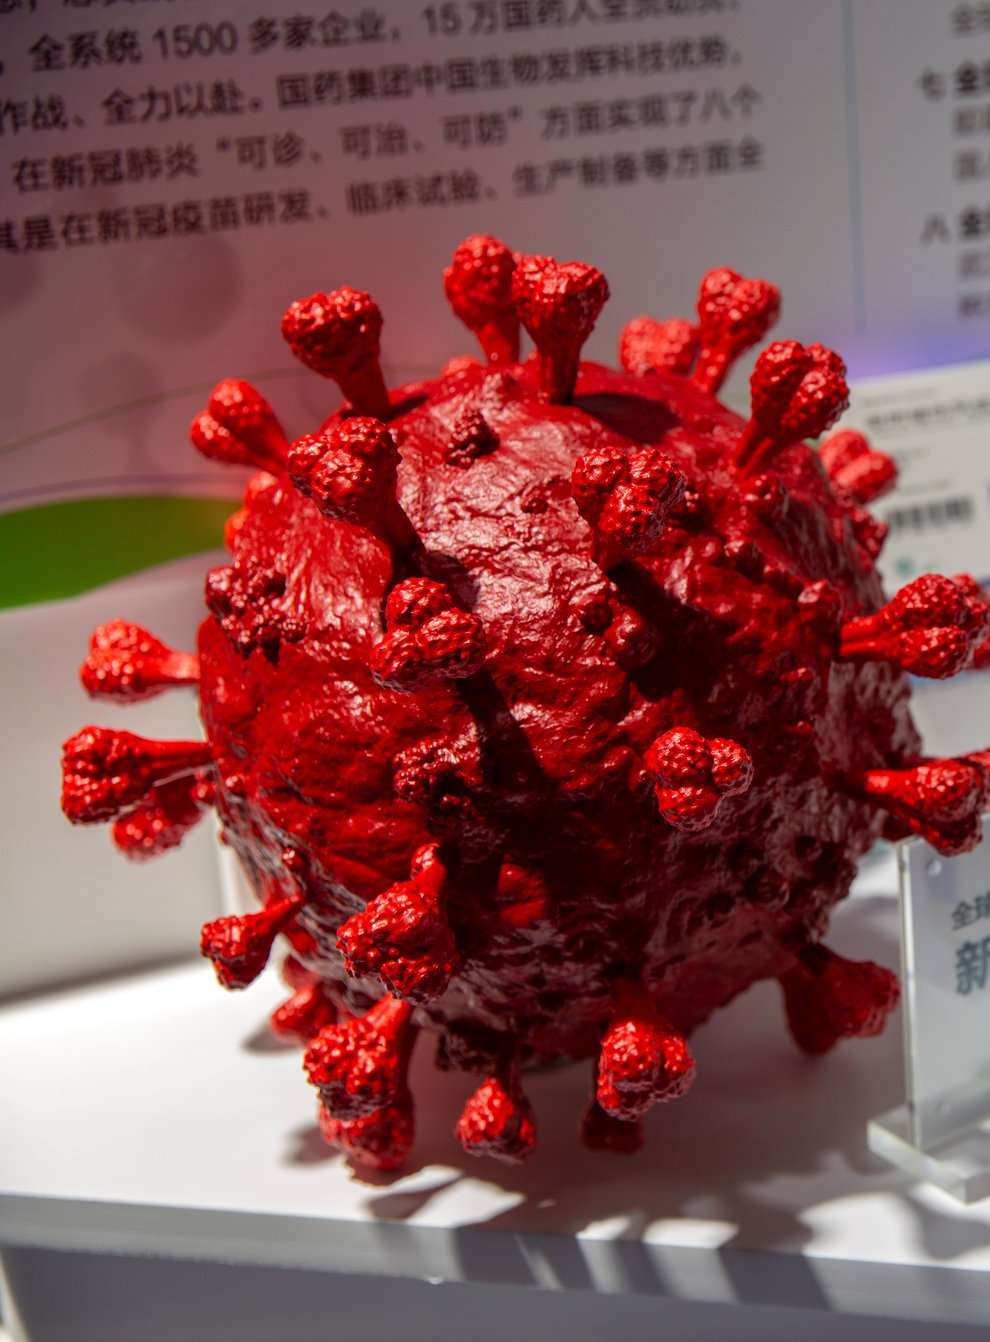 A model of a coronavirus is displayed next to boxes for COVID-19 vaccines at an exhibit by Chinese pharmaceutical firm Sinopharm